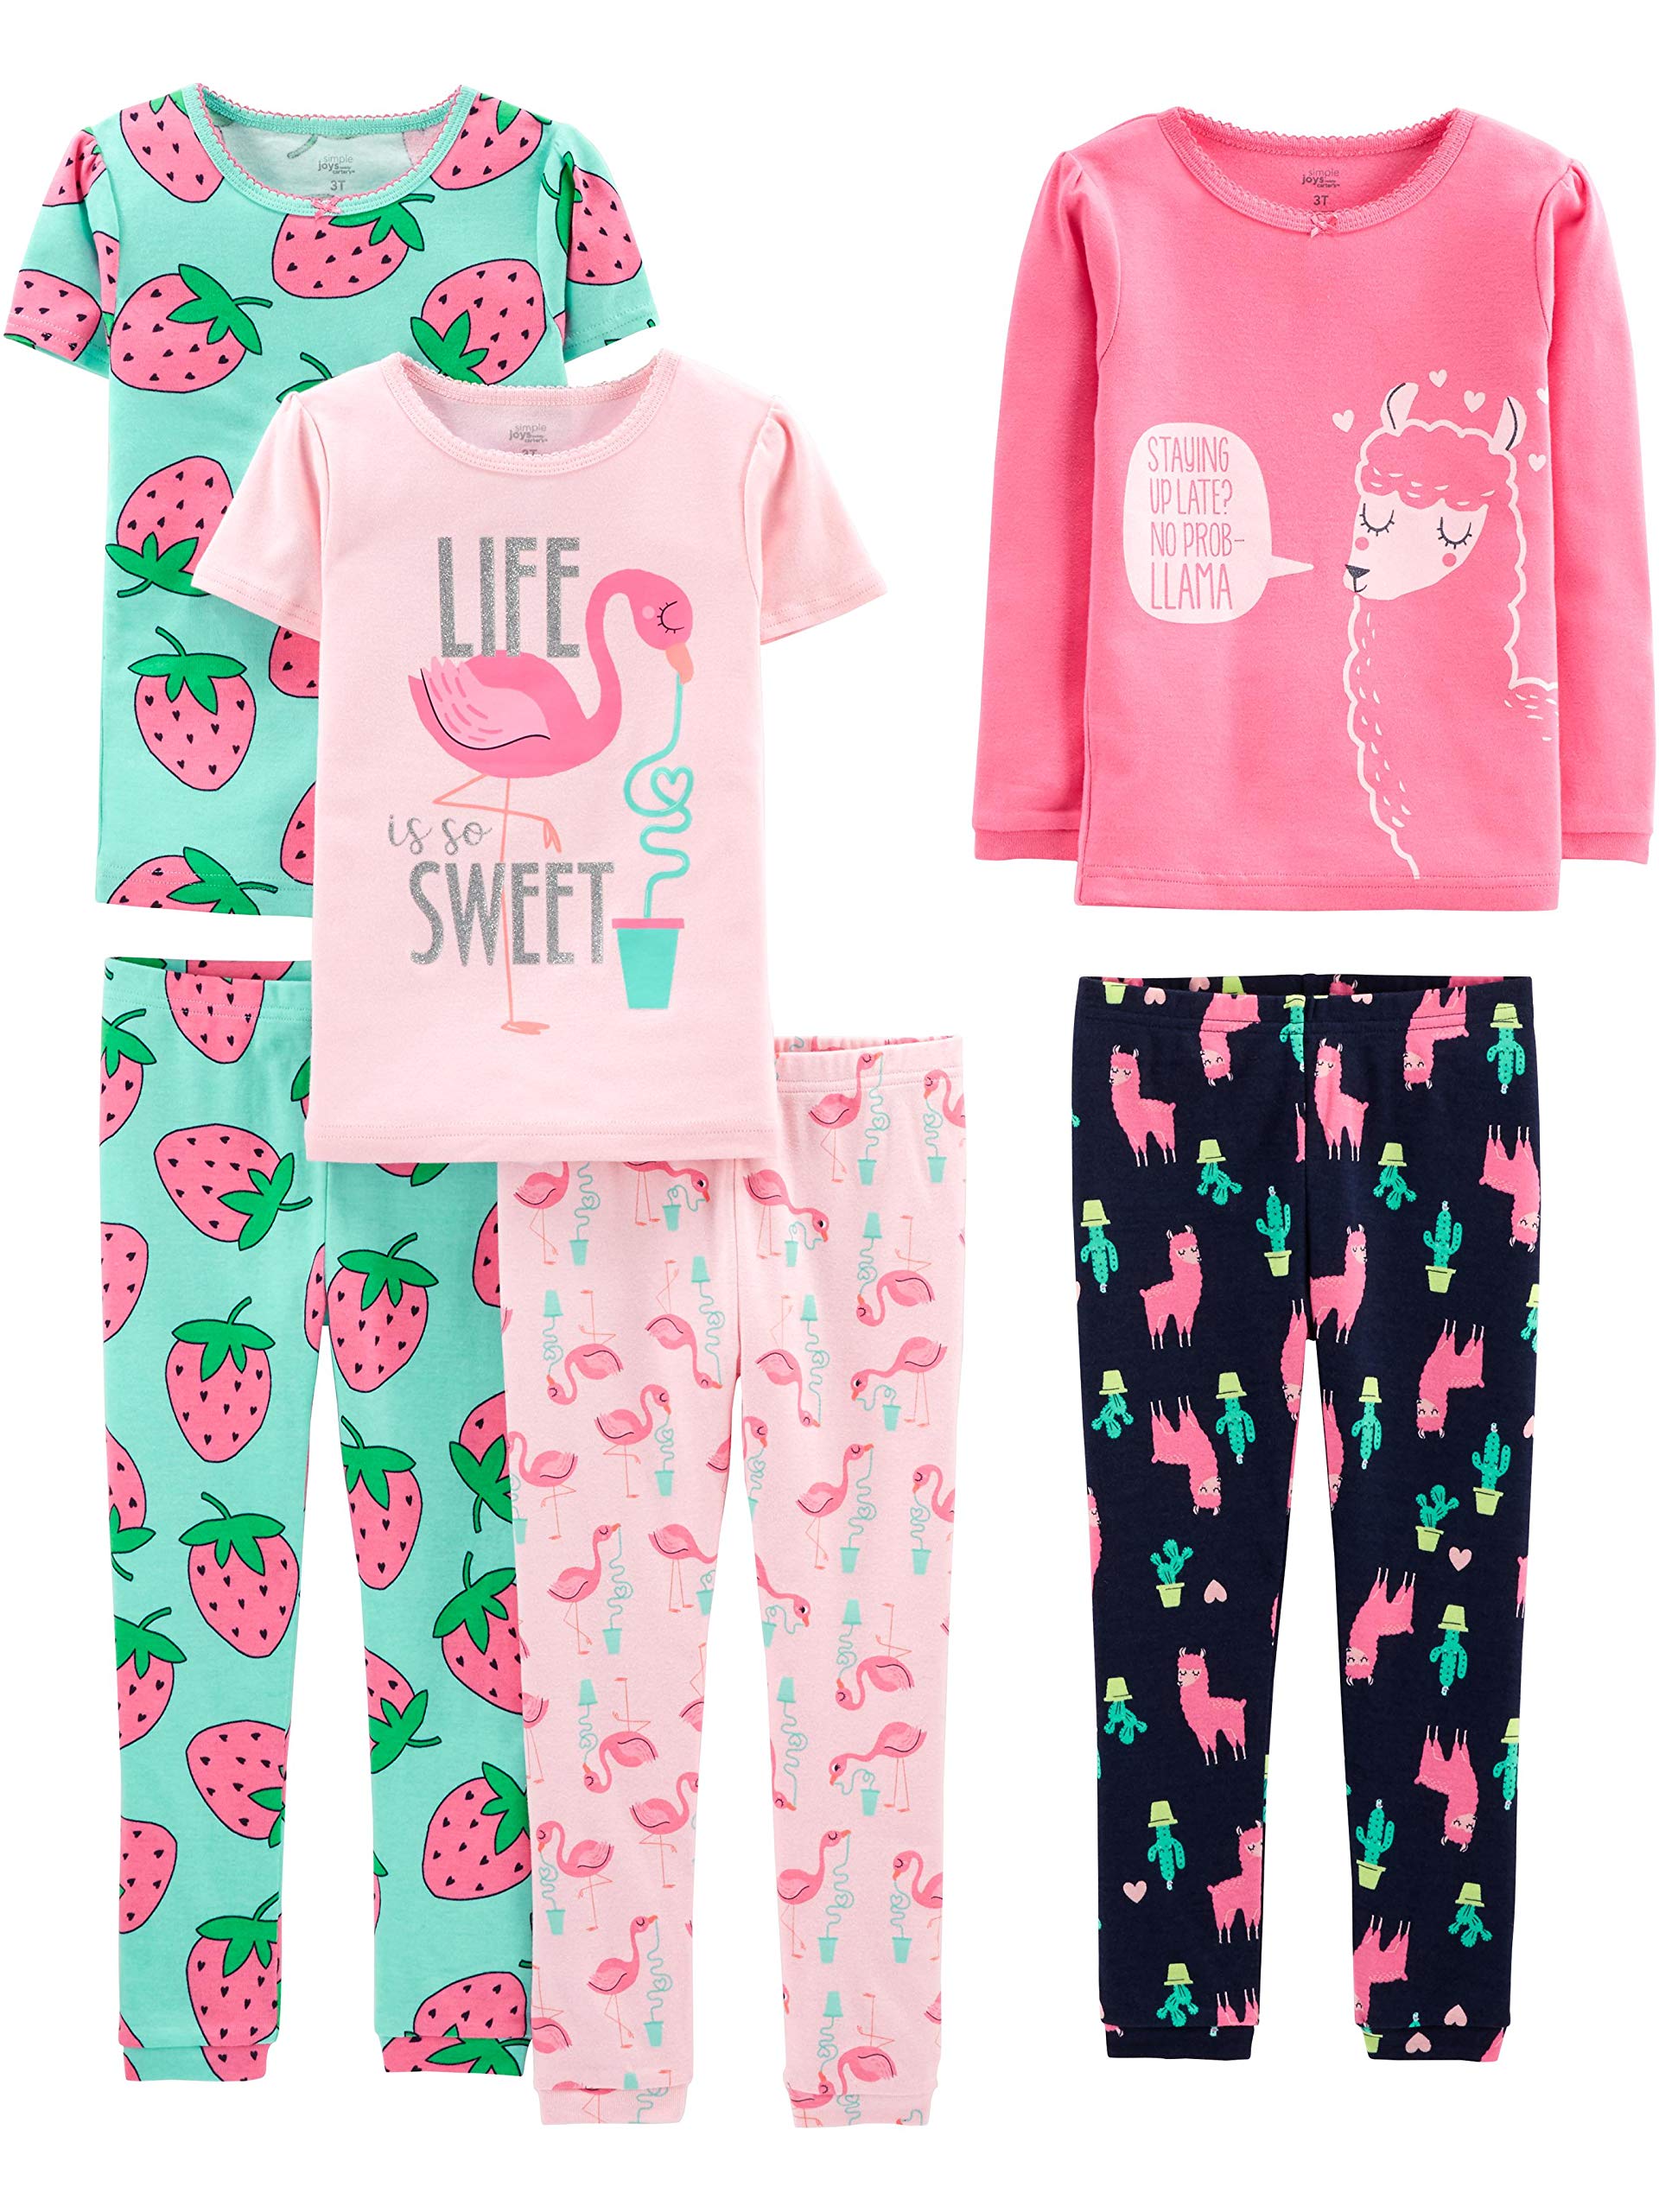 Simple Joys by Carter's Babies, Toddlers, and Girls' 6-Piece Snug-Fit Cotton Pajama Set